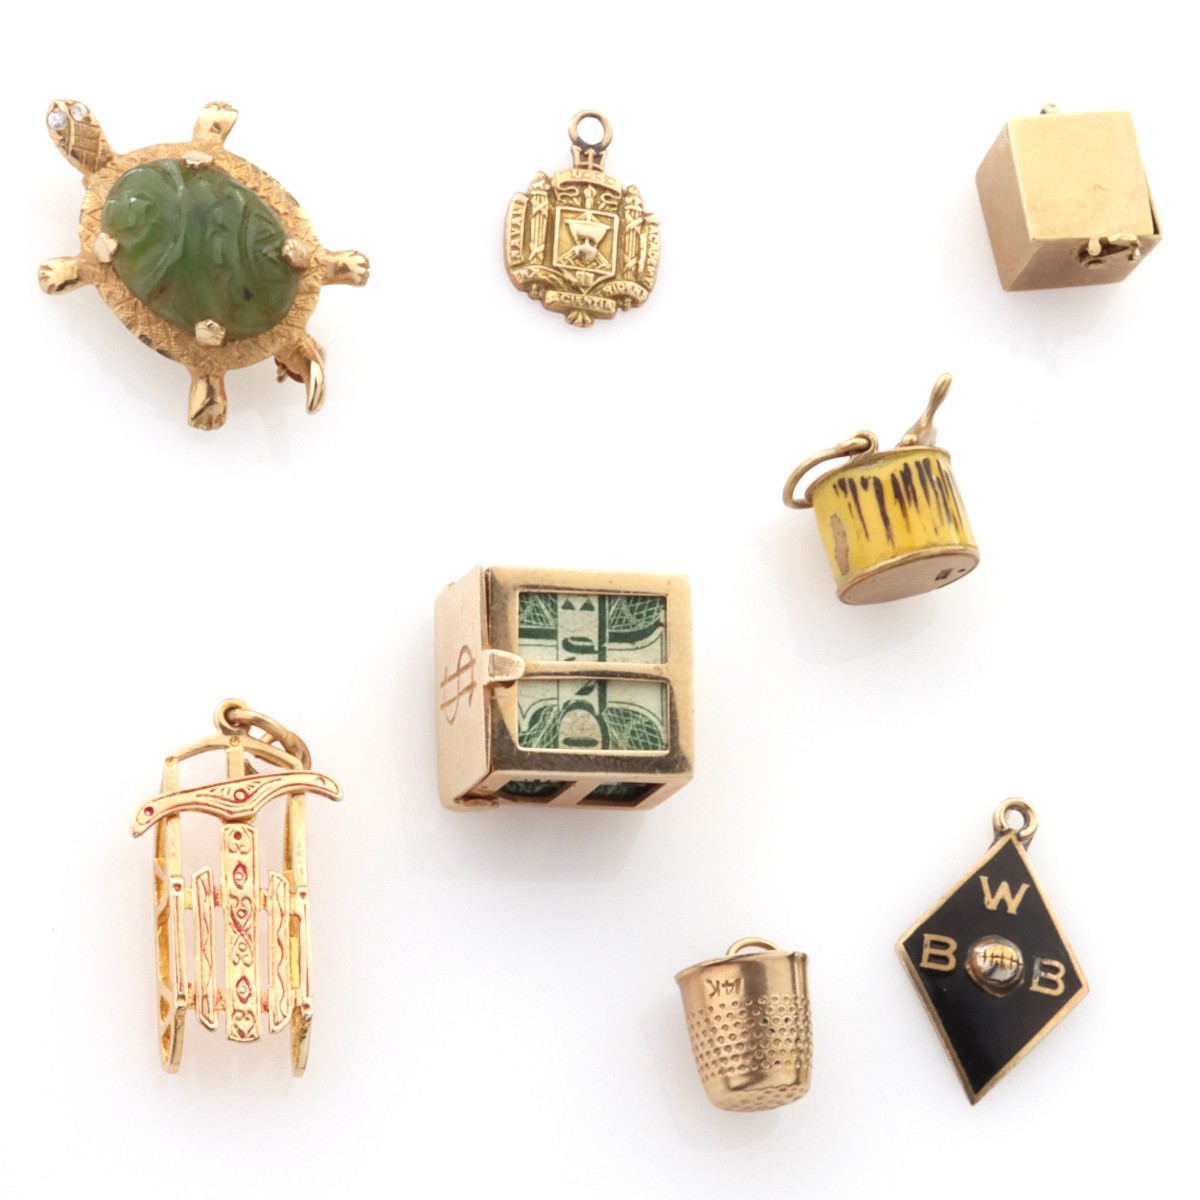 A COLLECTION OF 14K GOLD CHARMS ALONG WITH TURTLE PIN